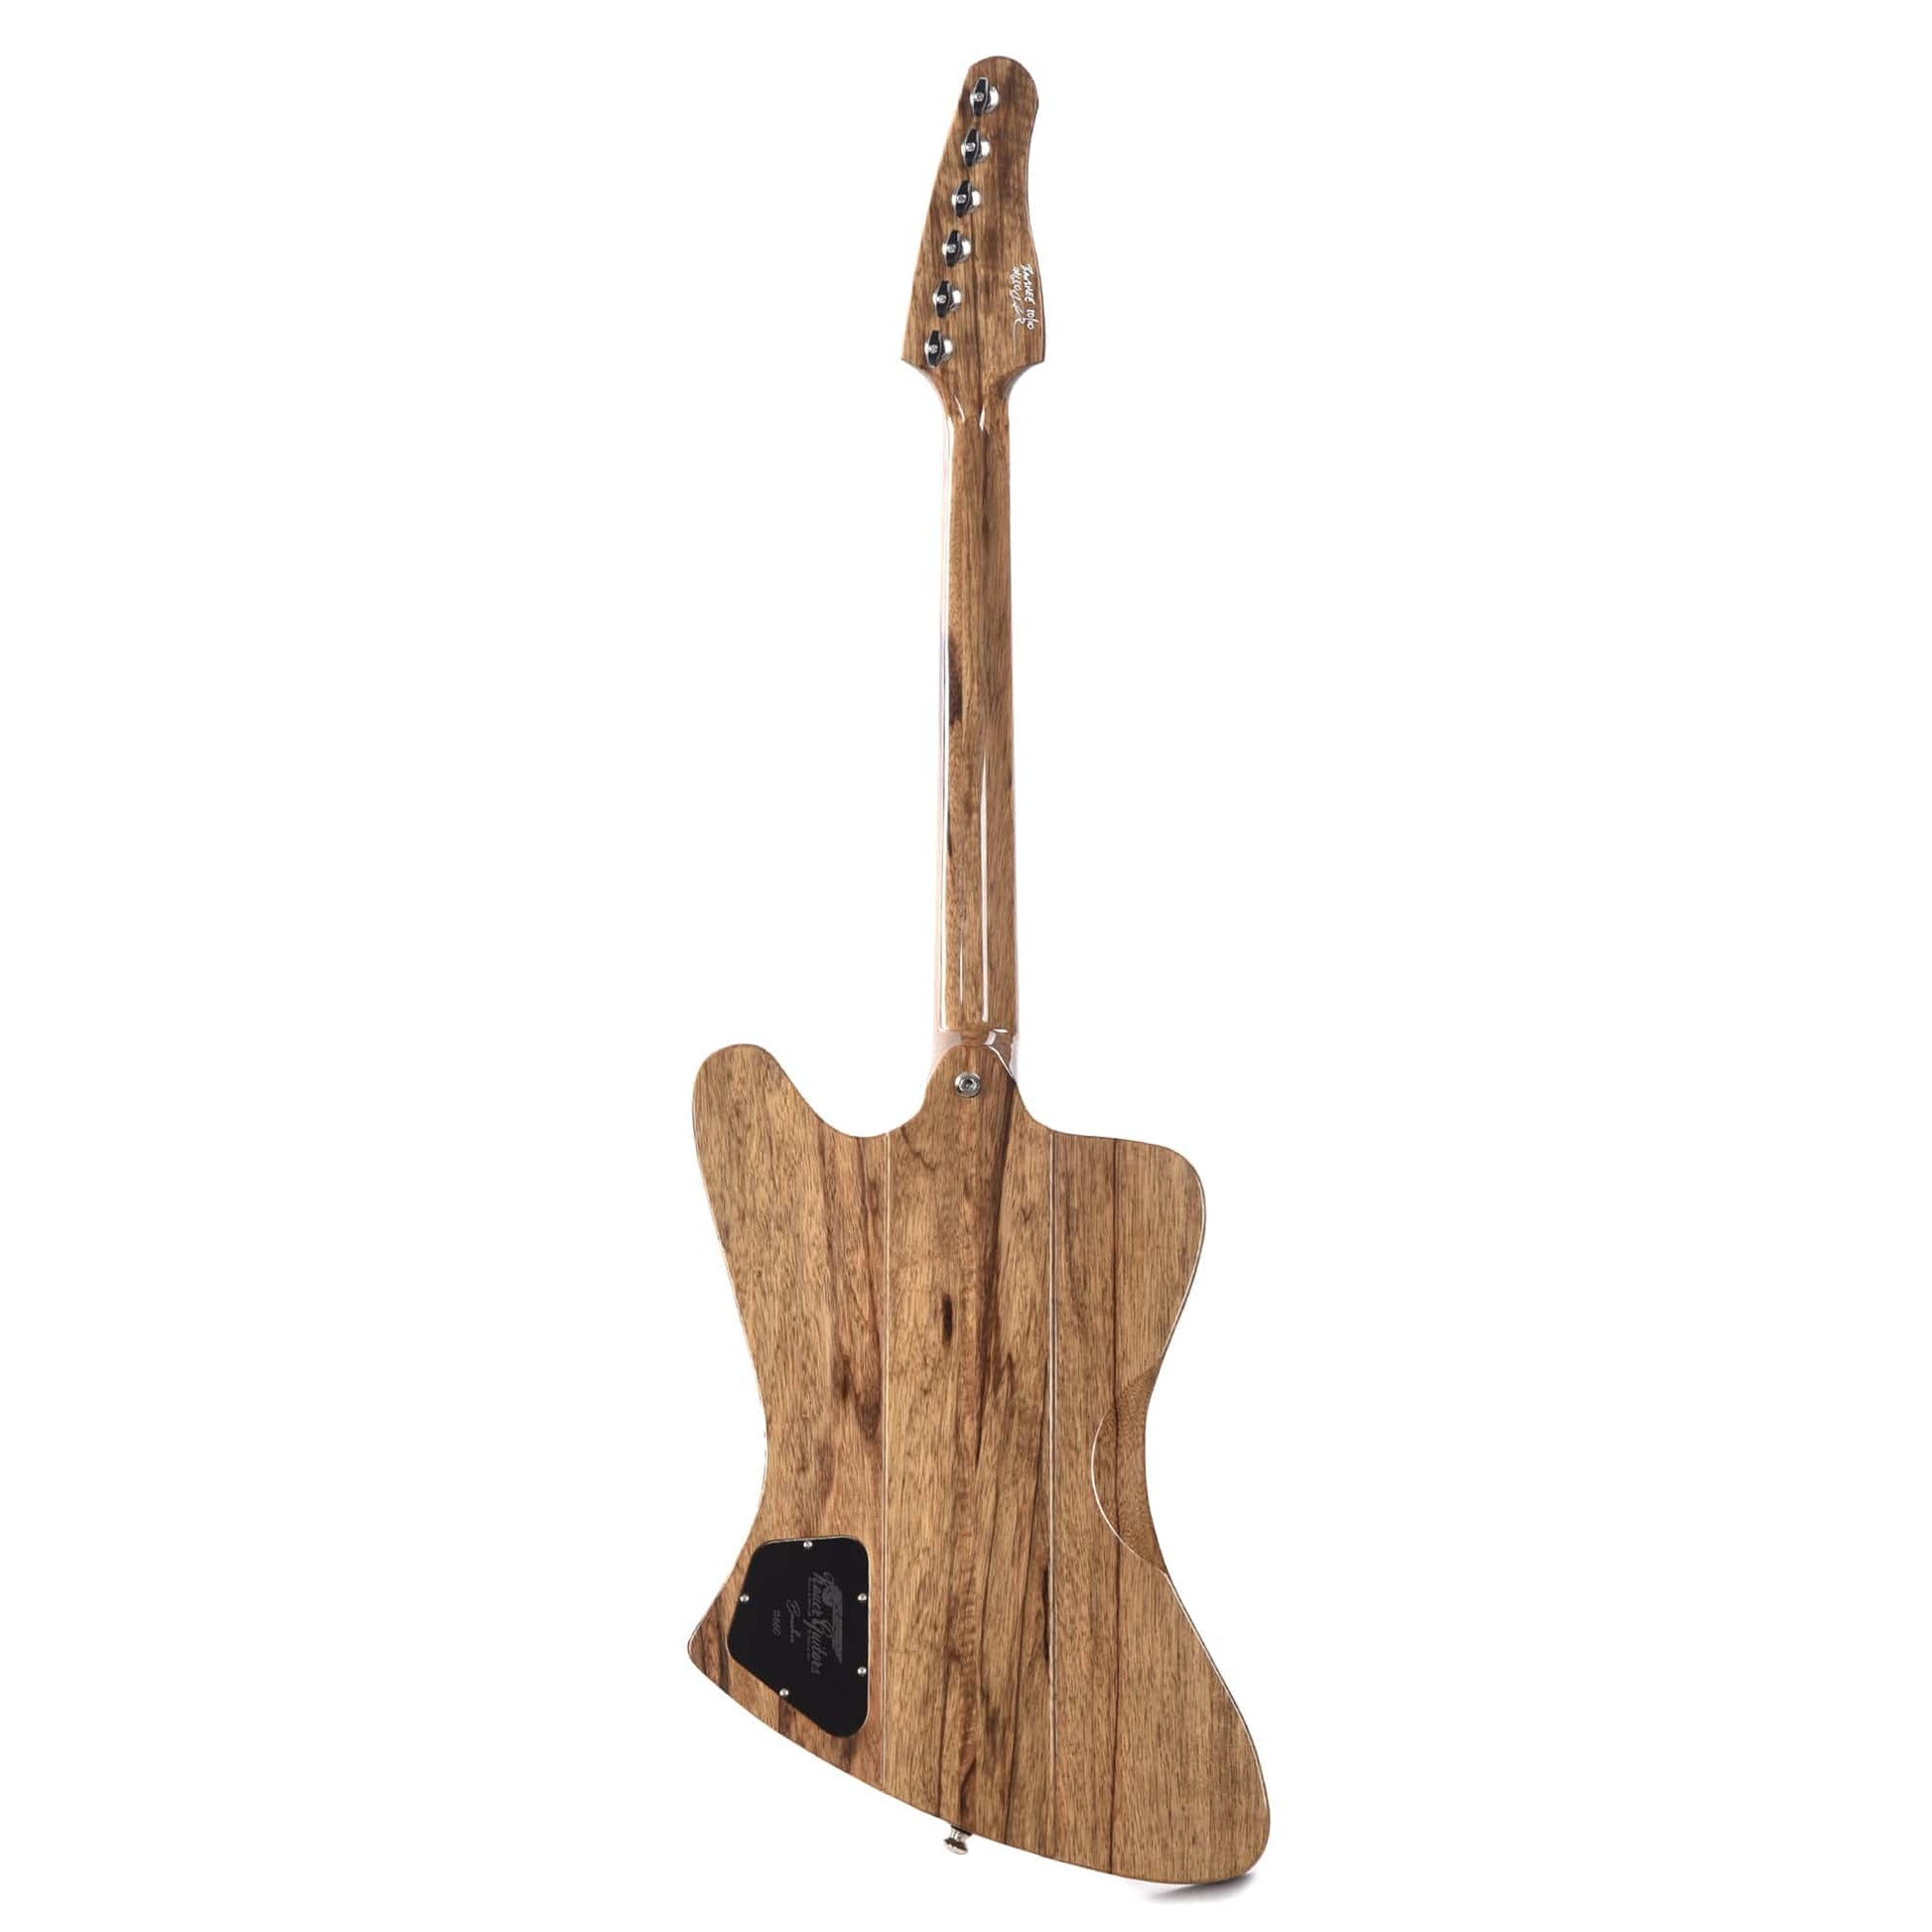 Kauer 2023 Limited Banshee Standard #10 of 10 Black Limba with White Purfling Natural Electric Guitars / Solid Body